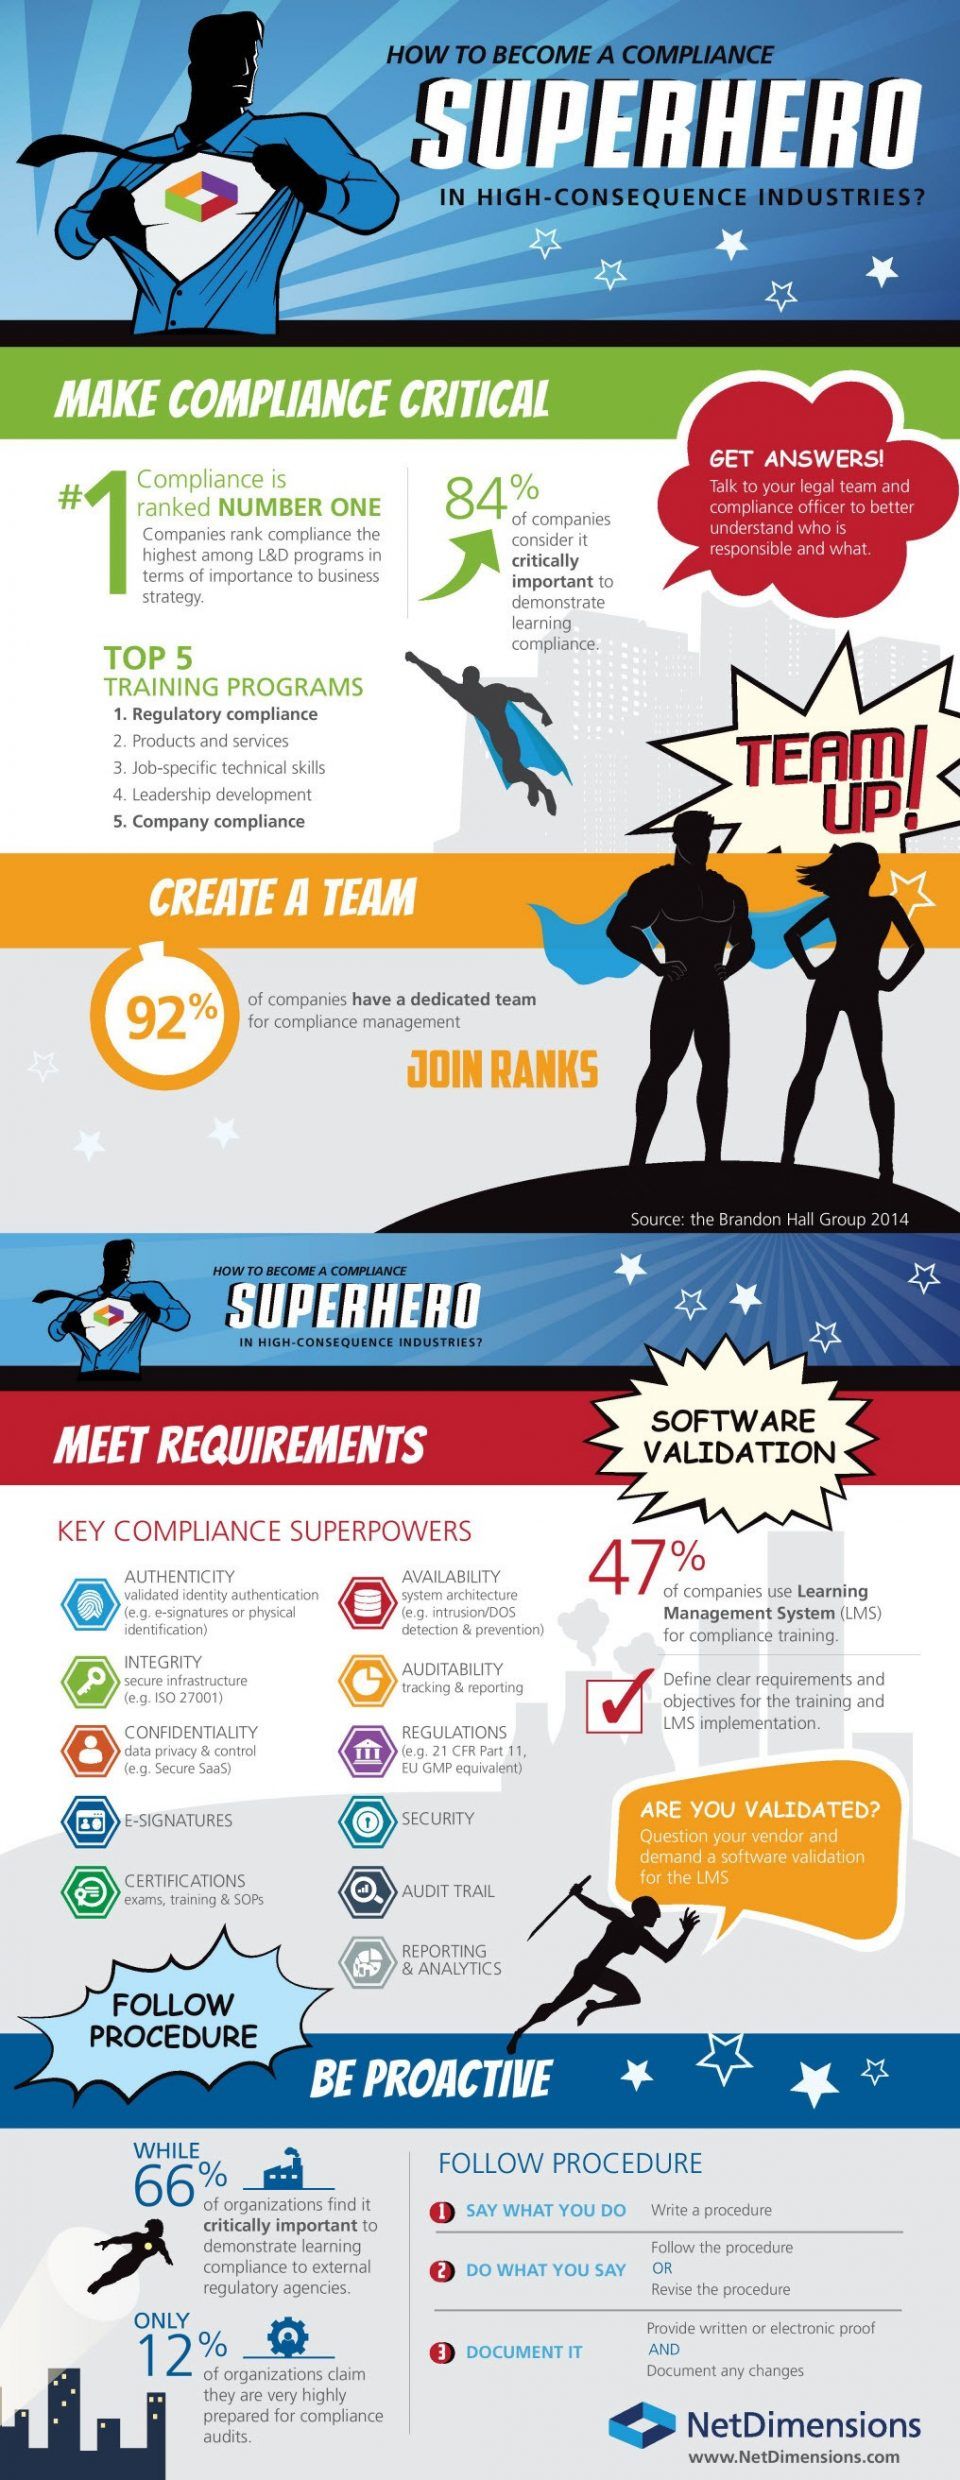 How to Become a Compliance Superhero Infographic